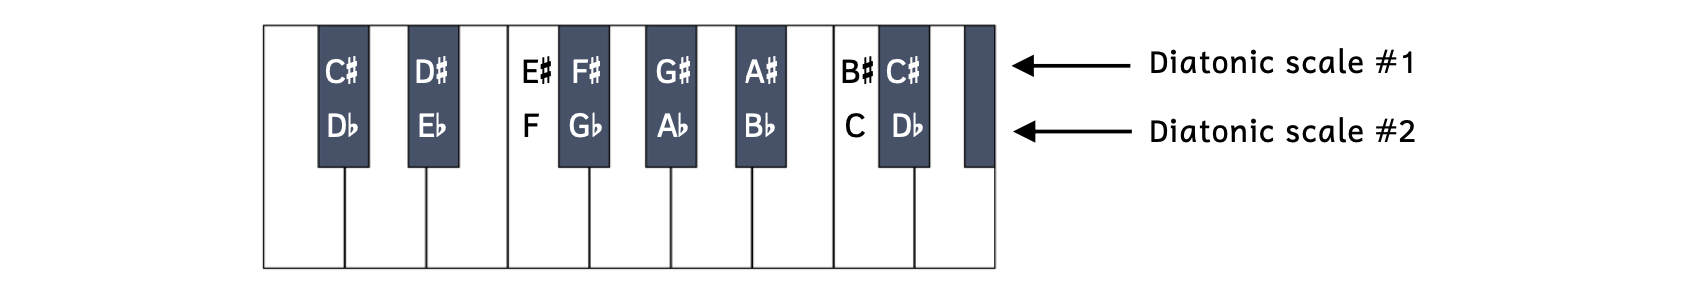 Two different diatonic scales on the same notes of the keyboard. Diatonic scale #1 contains C-sharp, D-sharp, E-sharp, F-sharp, G-sharp, A-sharp, B-sharp, and C-sharp. Diatonic scale #2 contains D-flat, E-flat, F, G-flat, A-flat, B-flat, C, and D-flat.